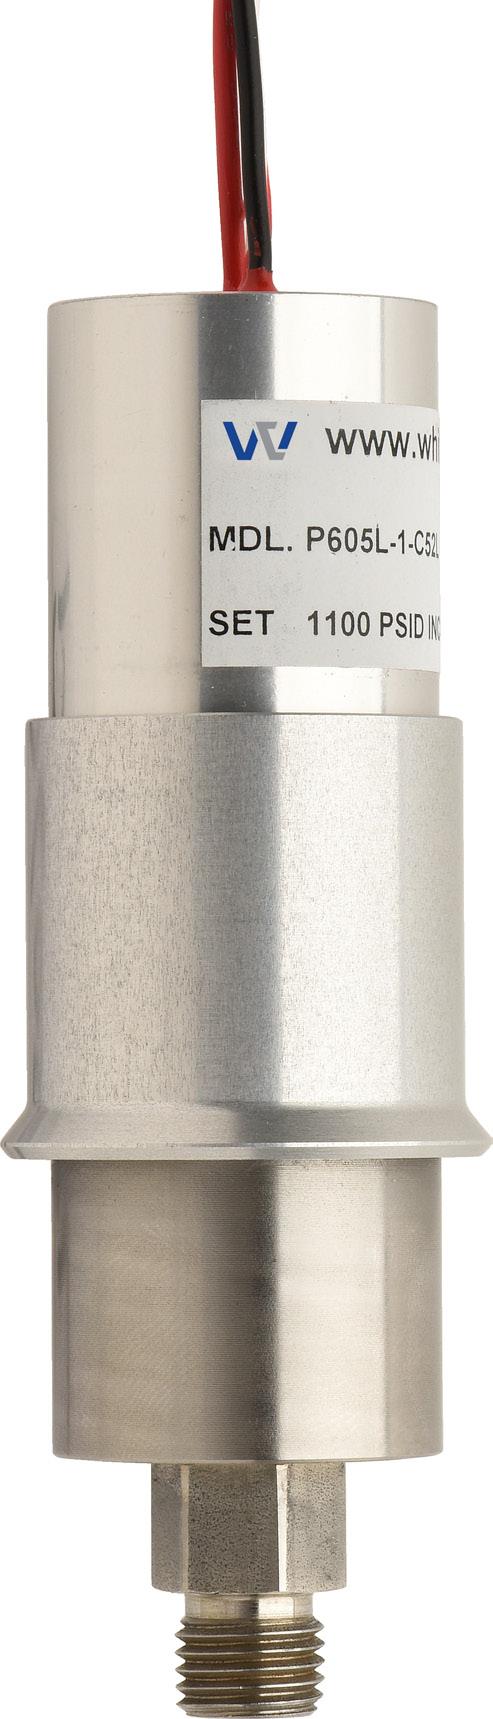 Pressure Switches P605L NEMA 4 High Pressure High Set Point High Accuracy Pressure Switch OVERVIEW The Whitman Controls P605L NEMA 4 High Pressure High Set Point High Accuracy Pressure Switches are a